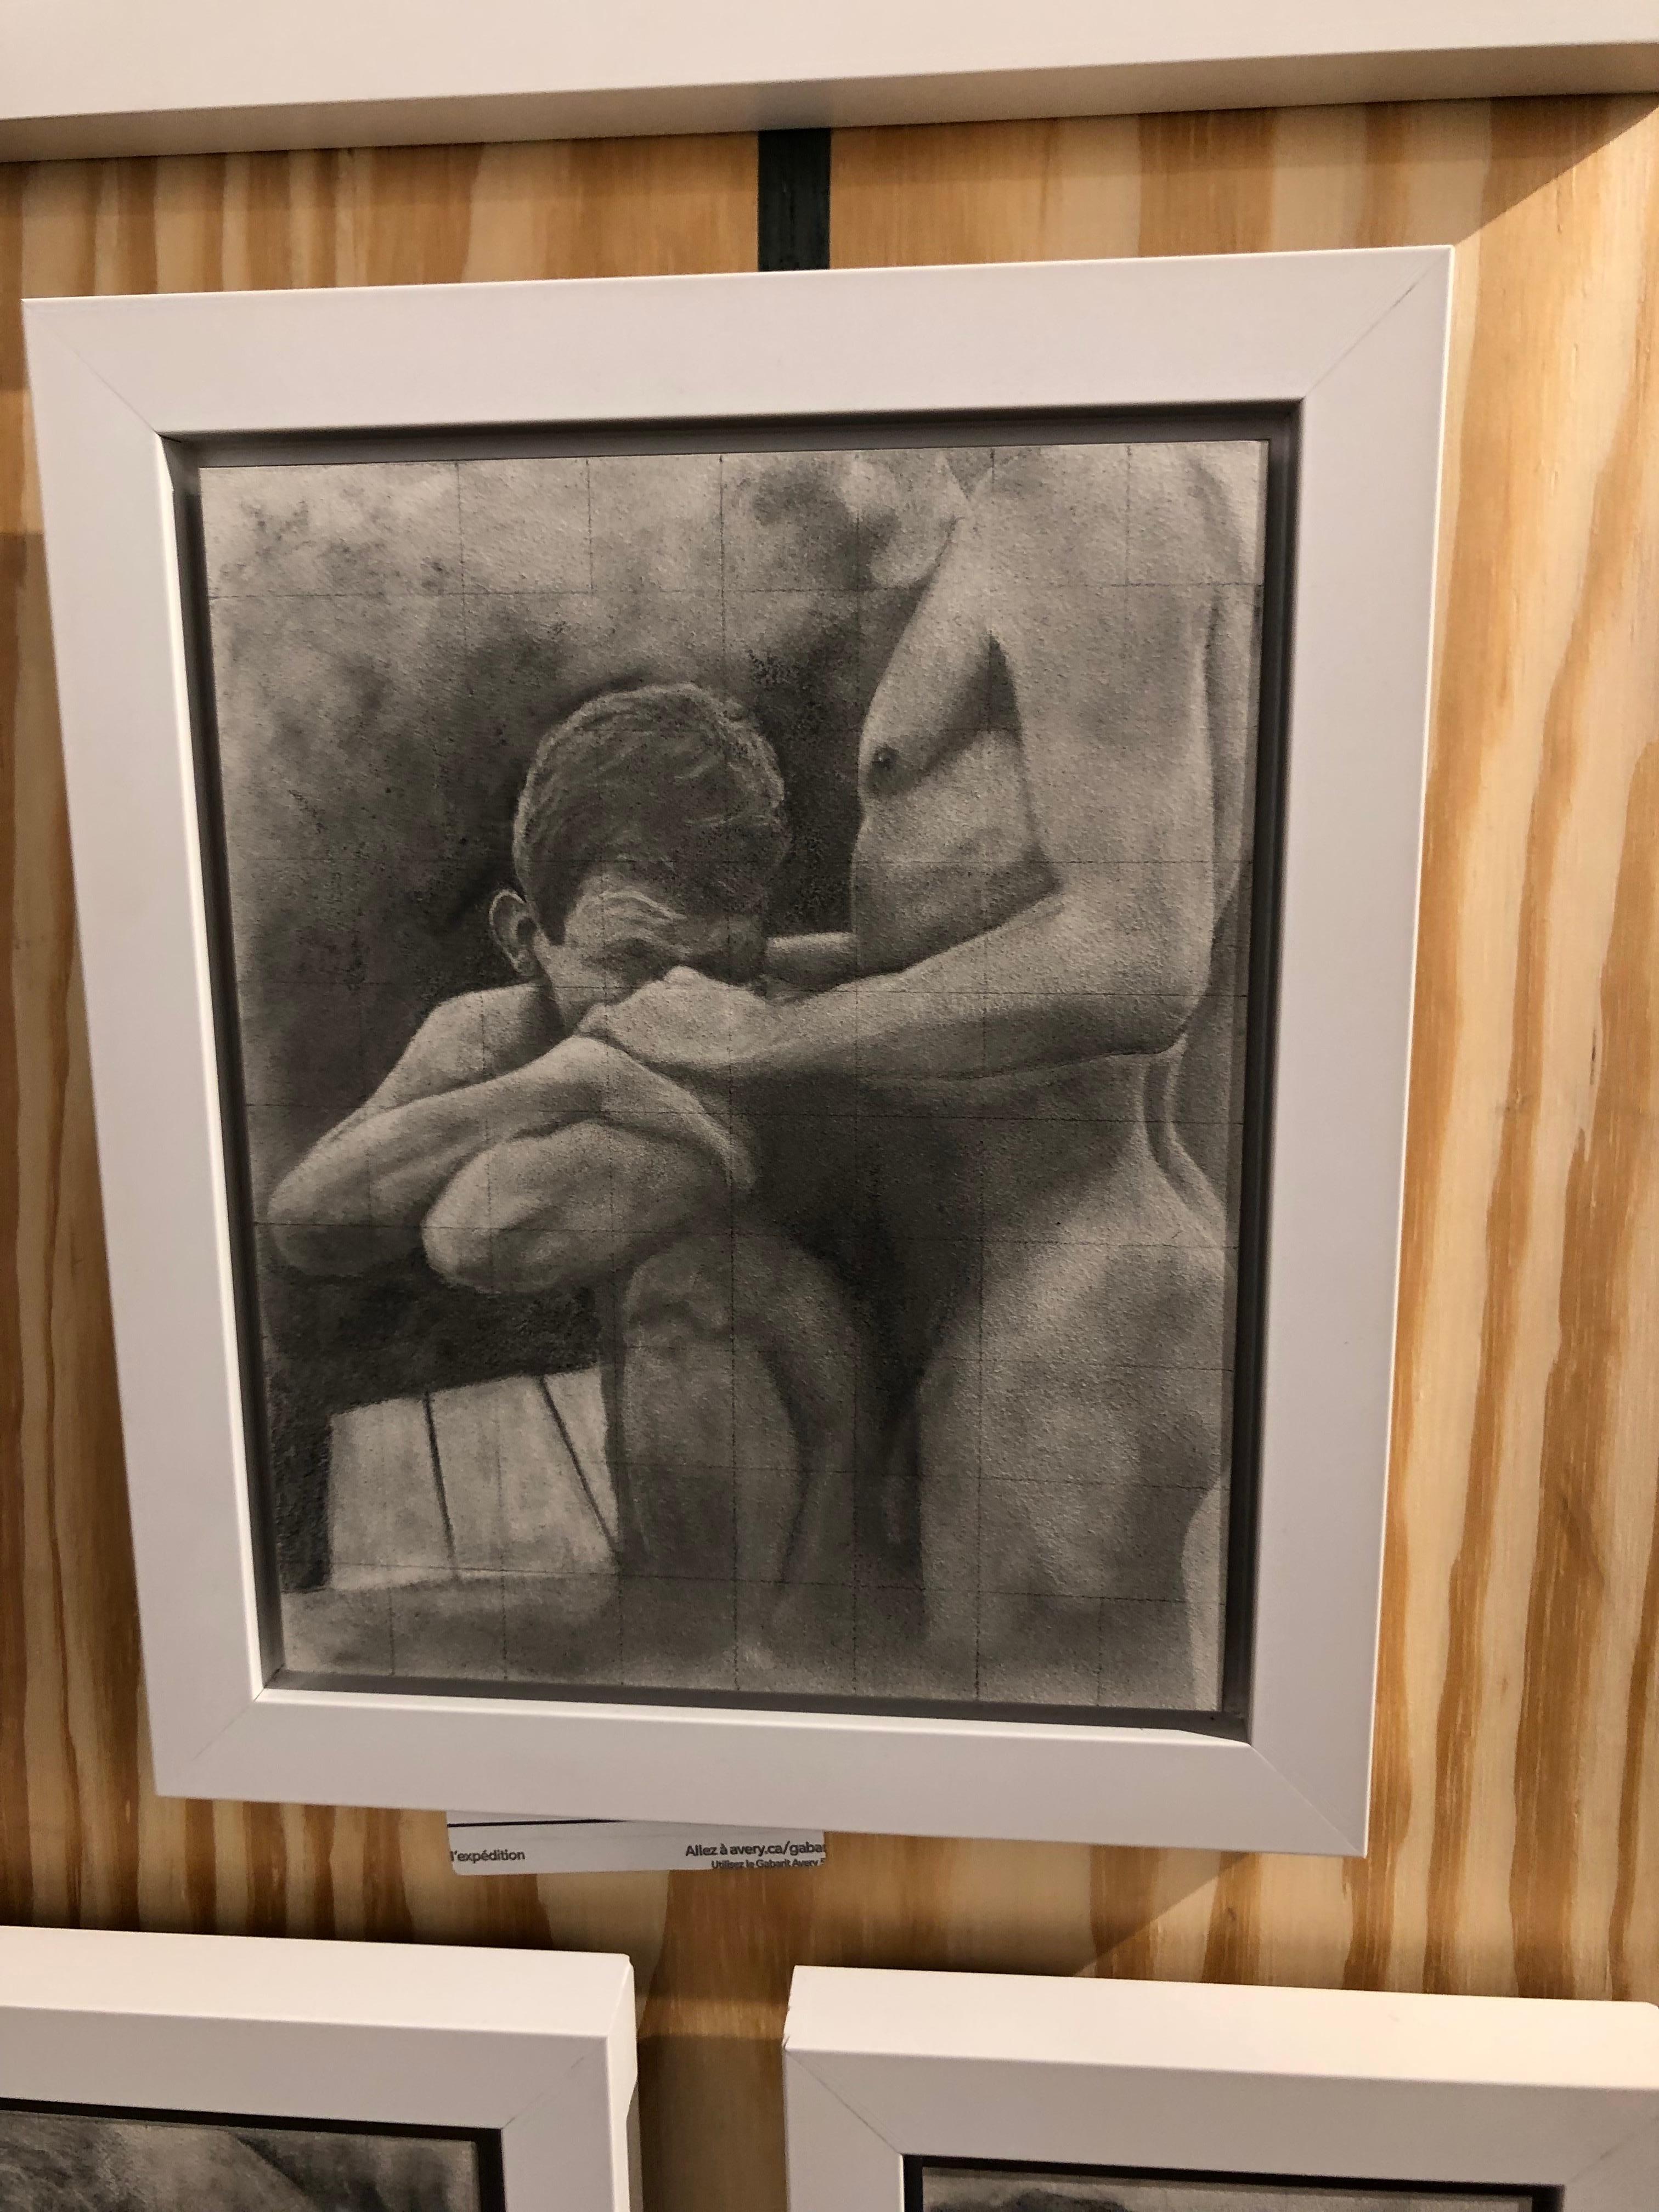 This untitled work by Rick Sindt was inspired by the works of Paul Cadmus.  It is a small graphite drawing of two male nude figures with both of their faces somewhat obscured during an intimate moment.  The graph lines often used by artist are still